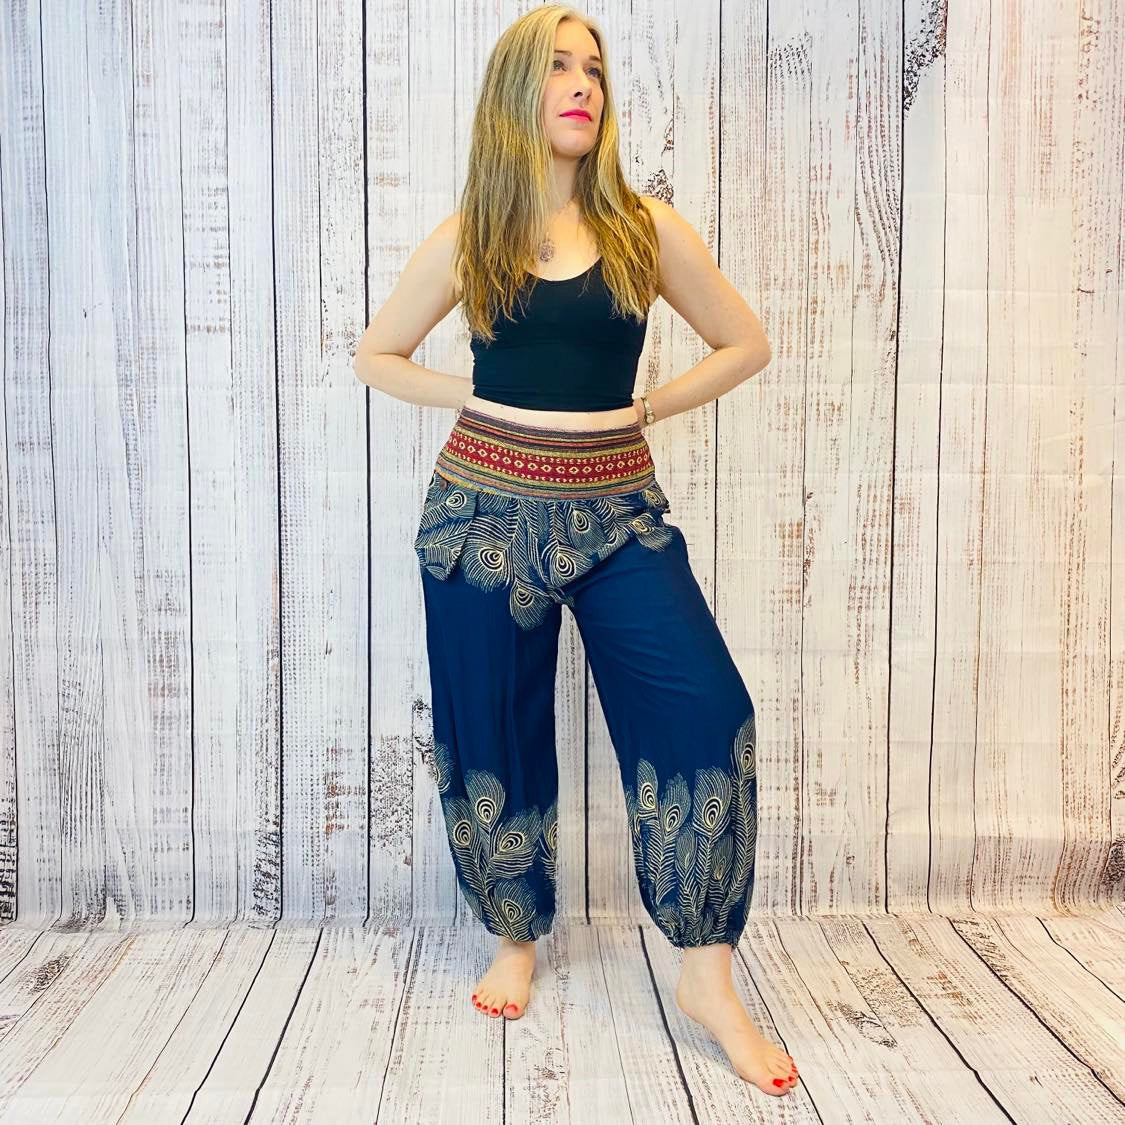 Patchwork Summer Pants With Pockets, Harem Yoga Pants, Bohemian Light  Weight Trousers, Hippie Beach Style, Festival Fashion, Retro Style -   Canada